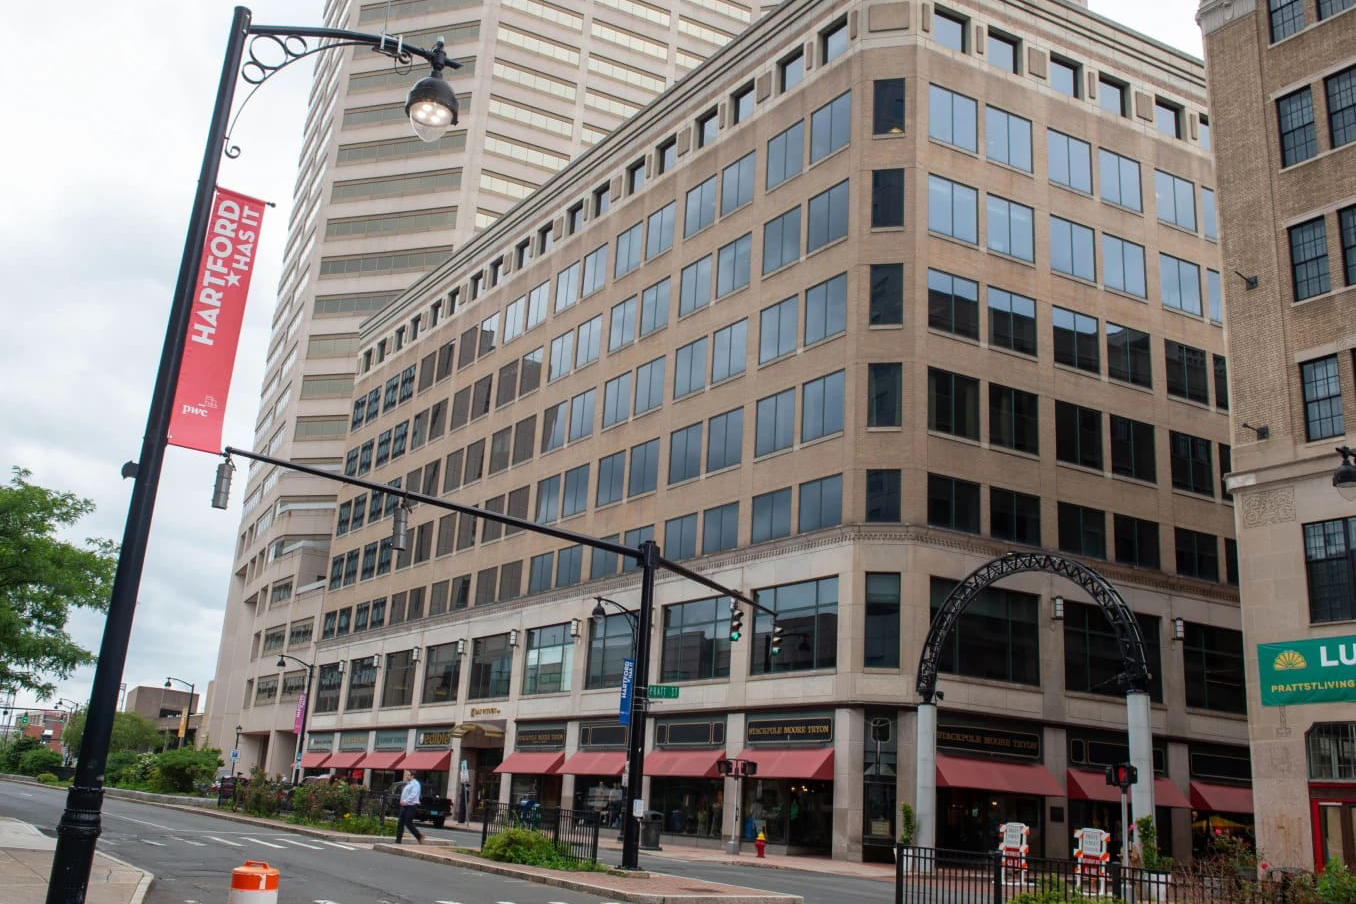 The office building at 242 Trumbull Street forms much of the north side of Pratt Street. The building has been acquired and upper floors of office space are targeted for conversion to housing (Aaron Flaum/Hartford Courant)